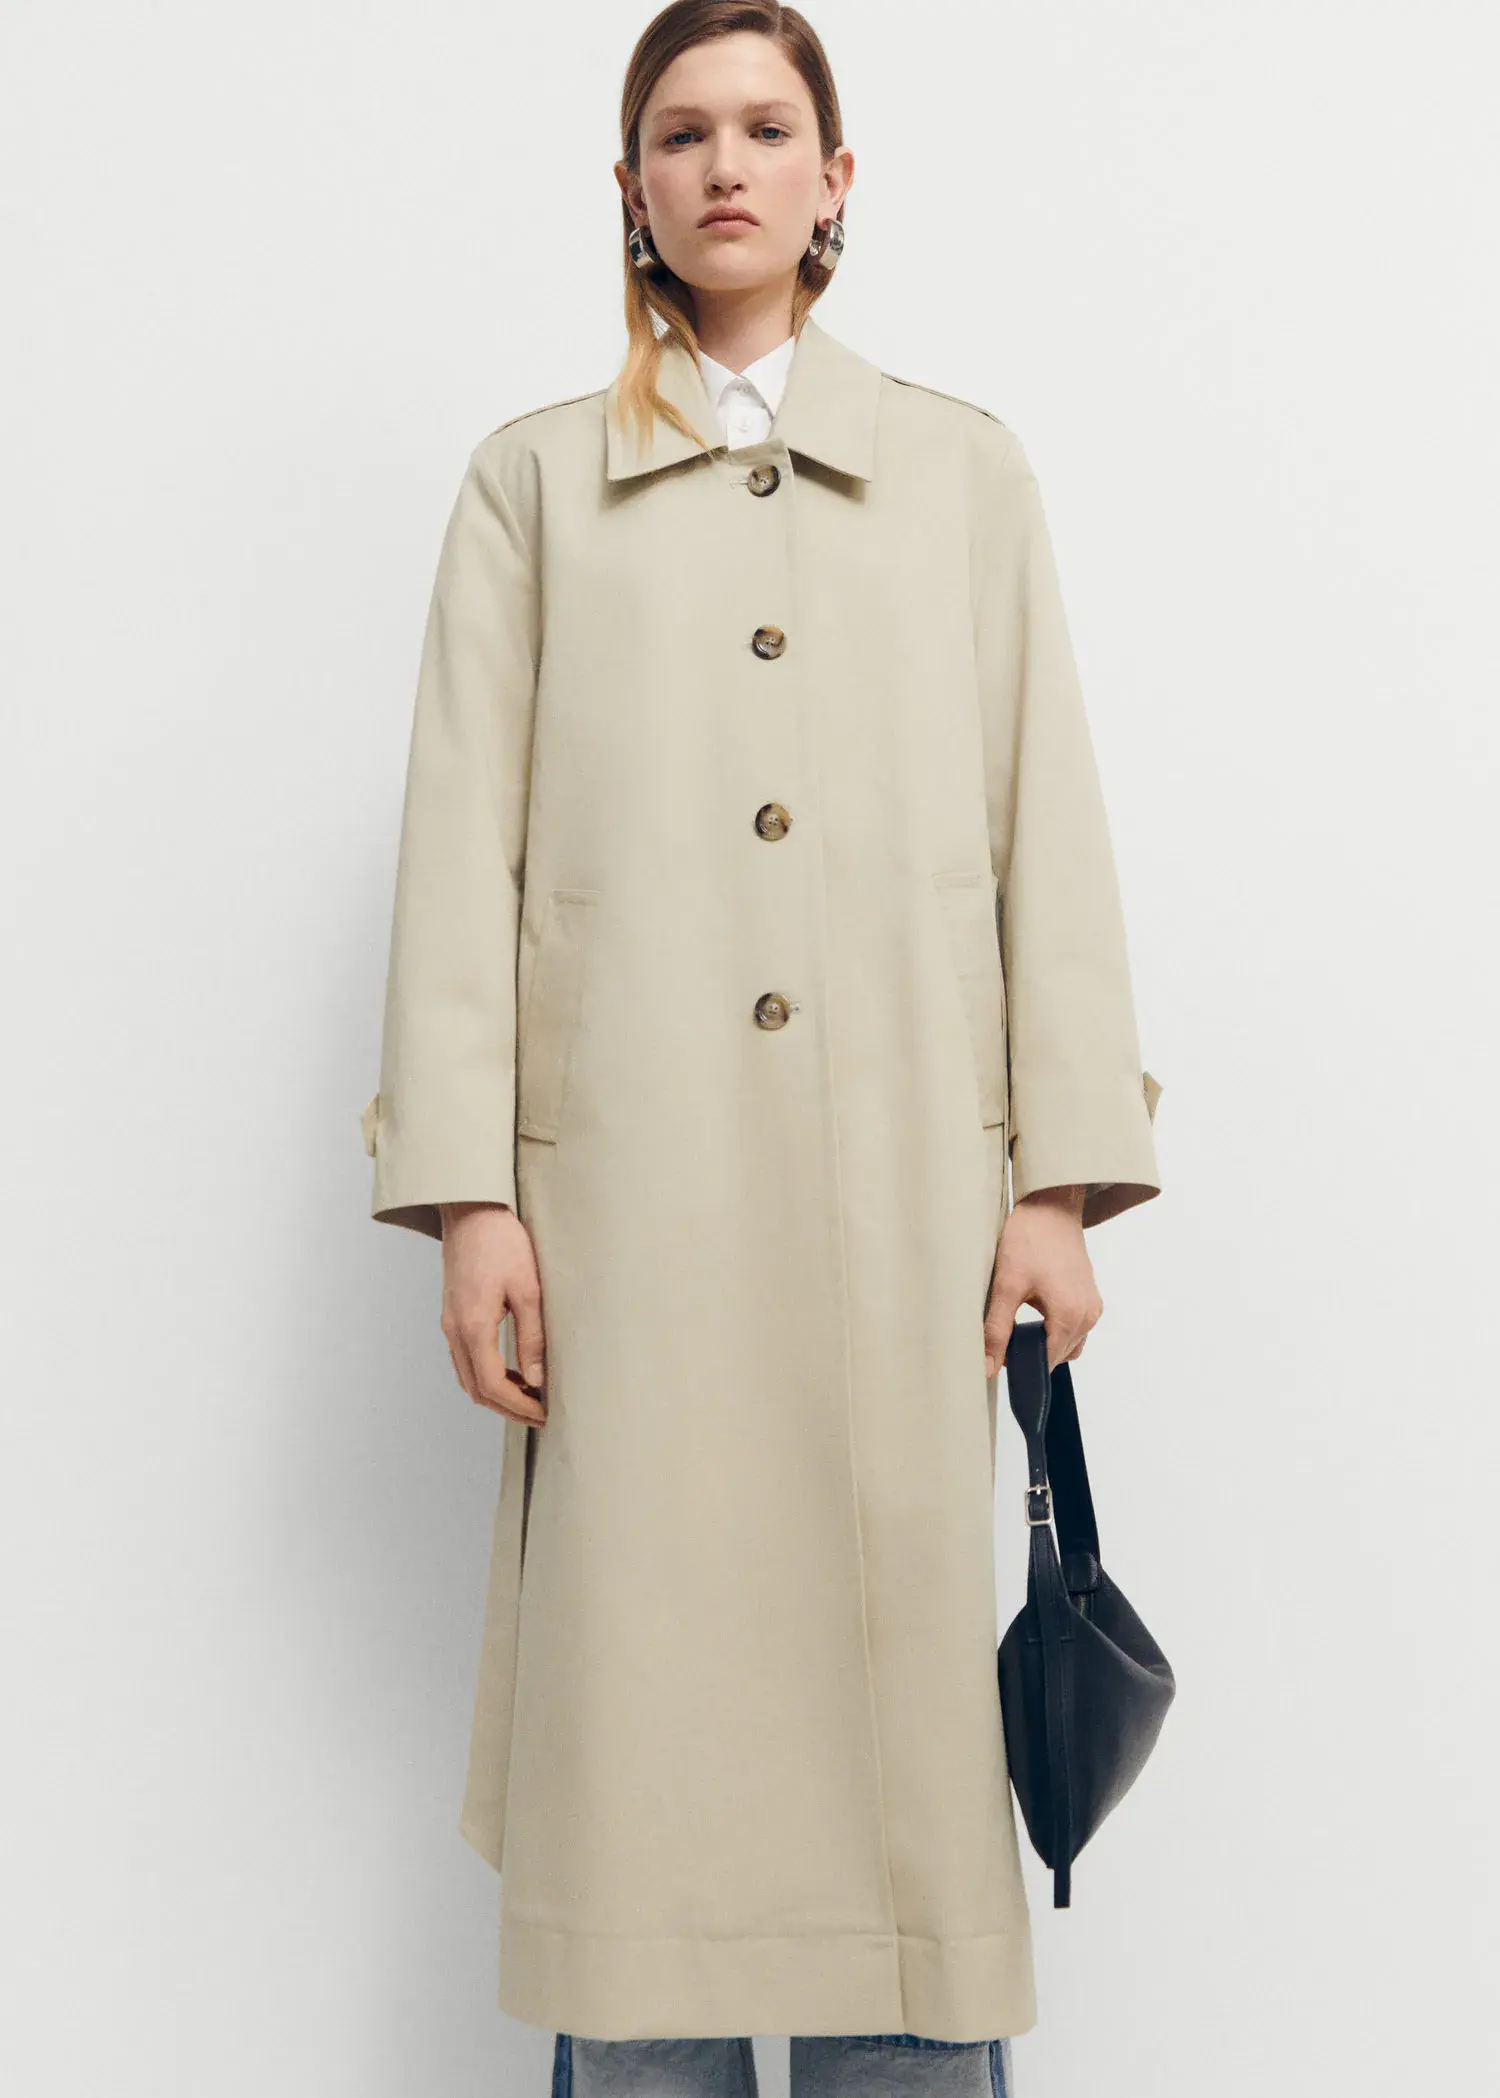 Mango Cotton trench coat with shirt collar. 2